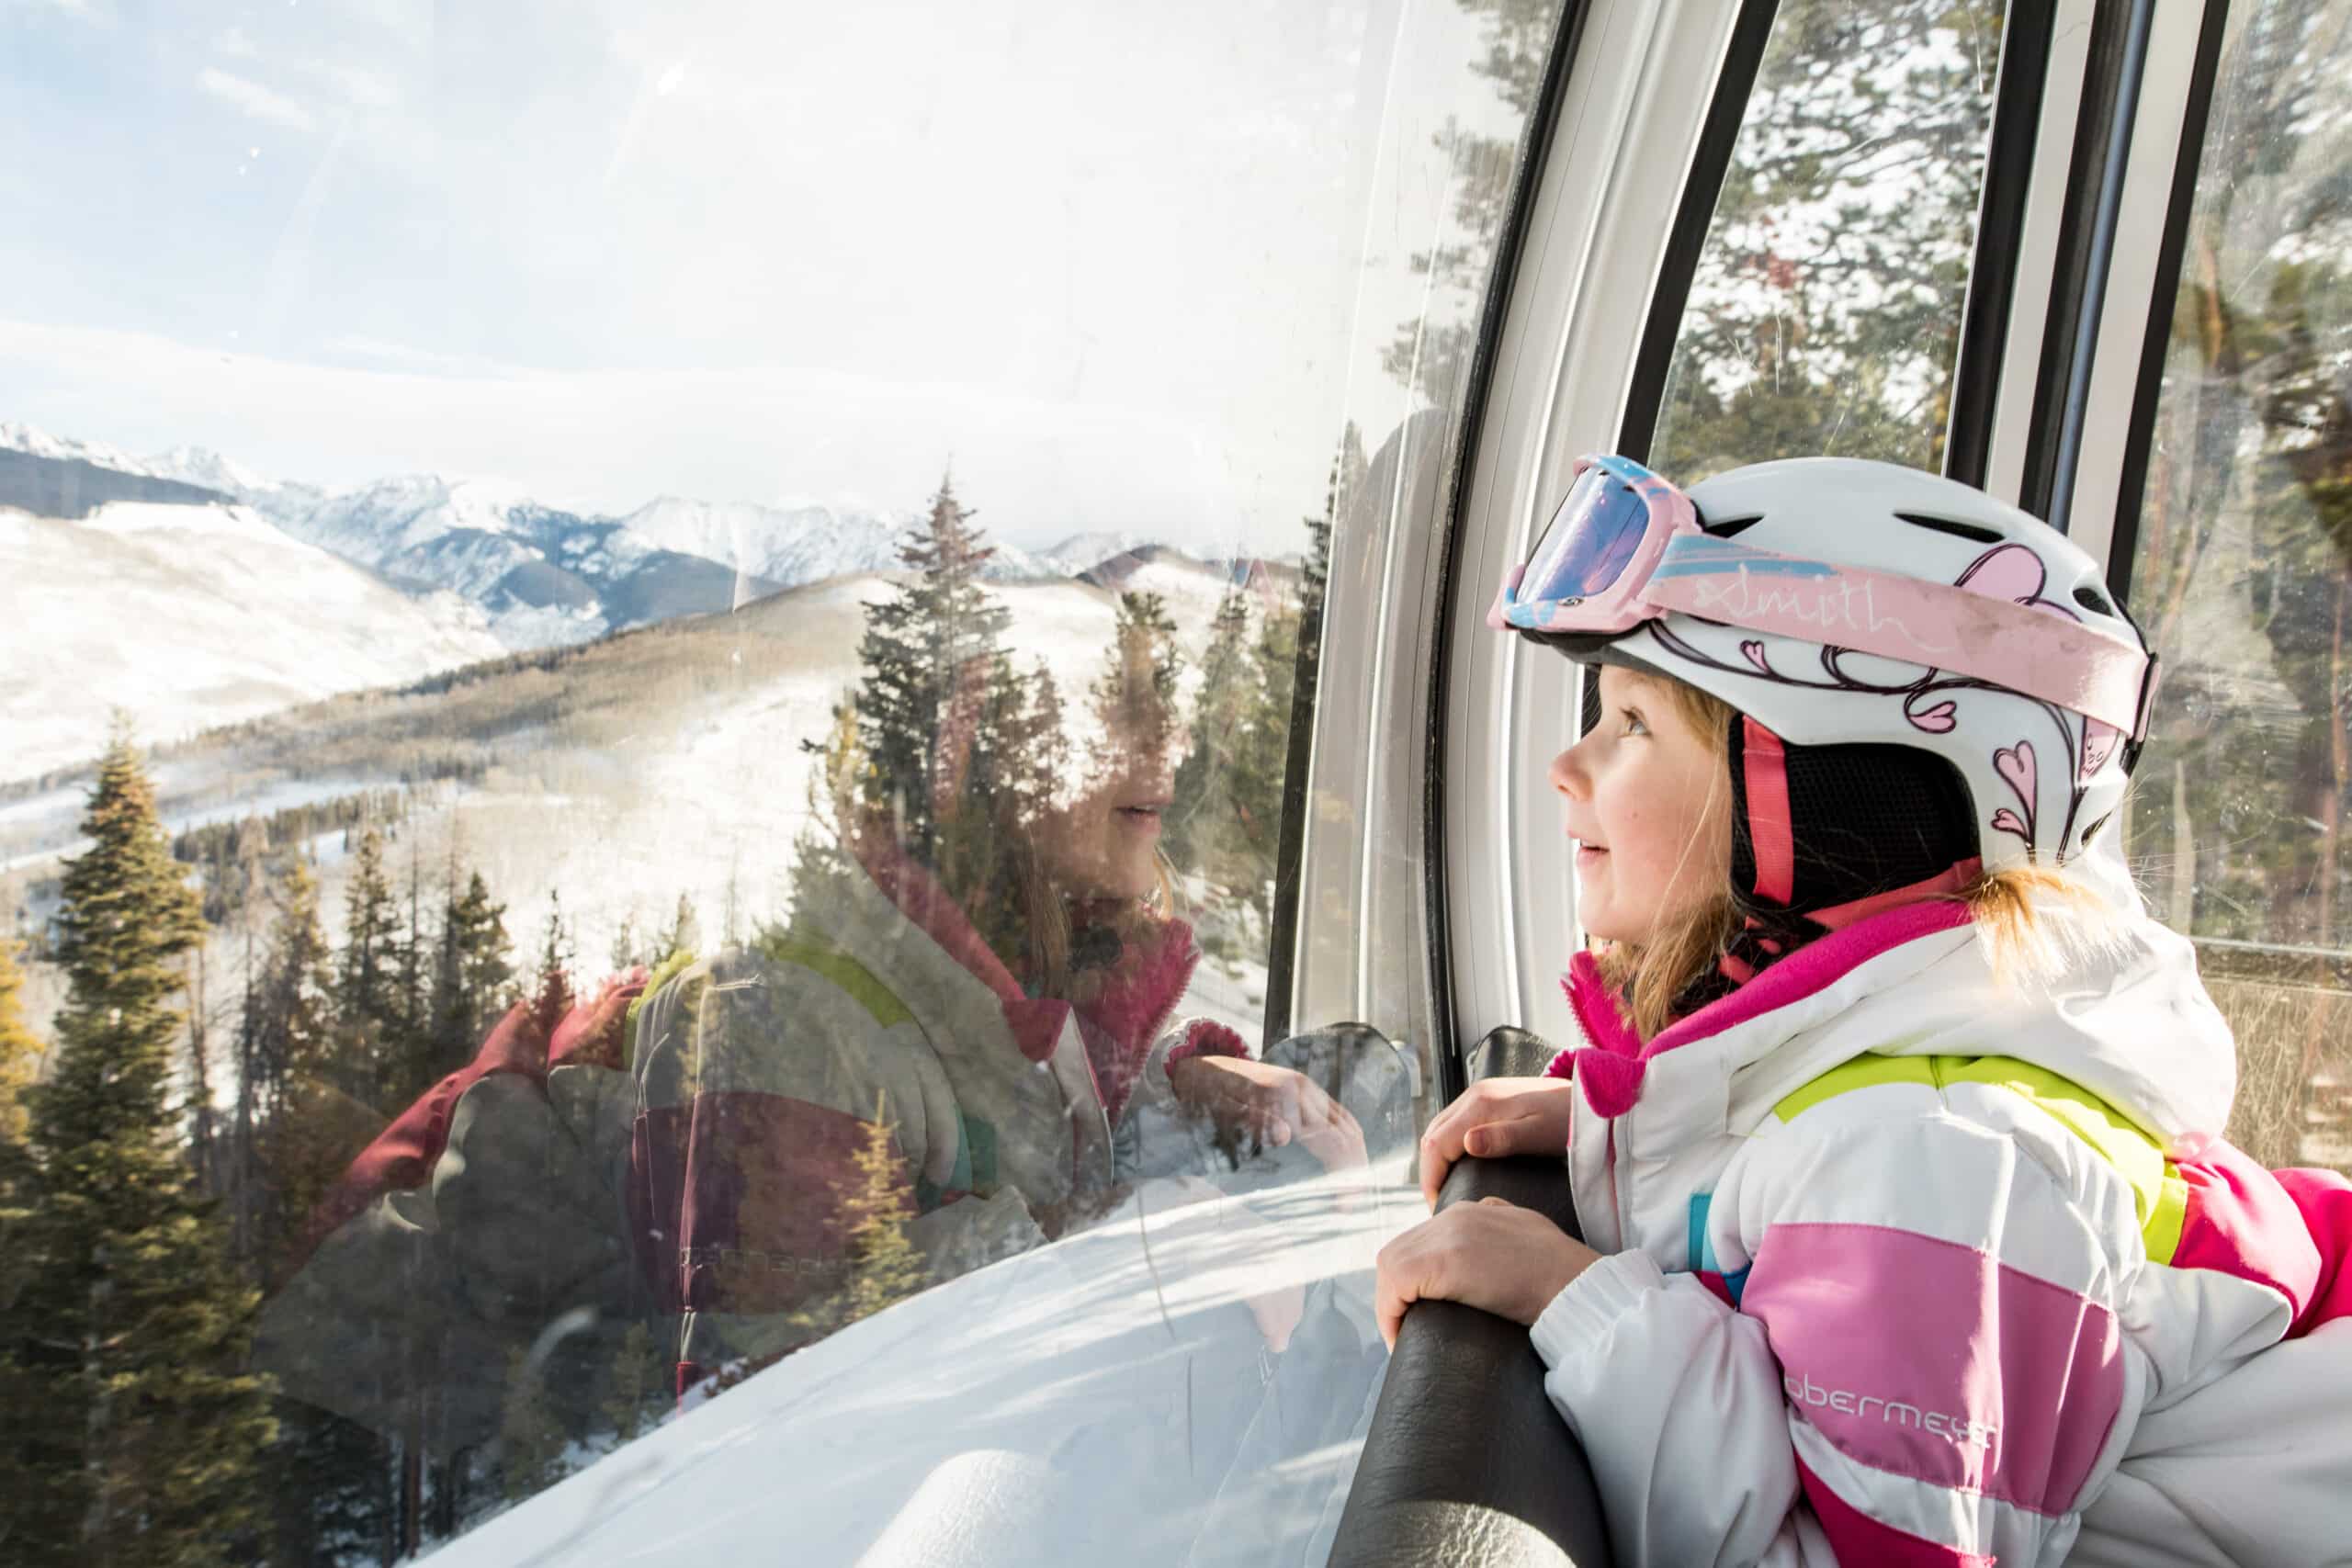 A child wearing a white and pink ski helmet, googles and jacket stares at Vail winter scenery from the gondola window.